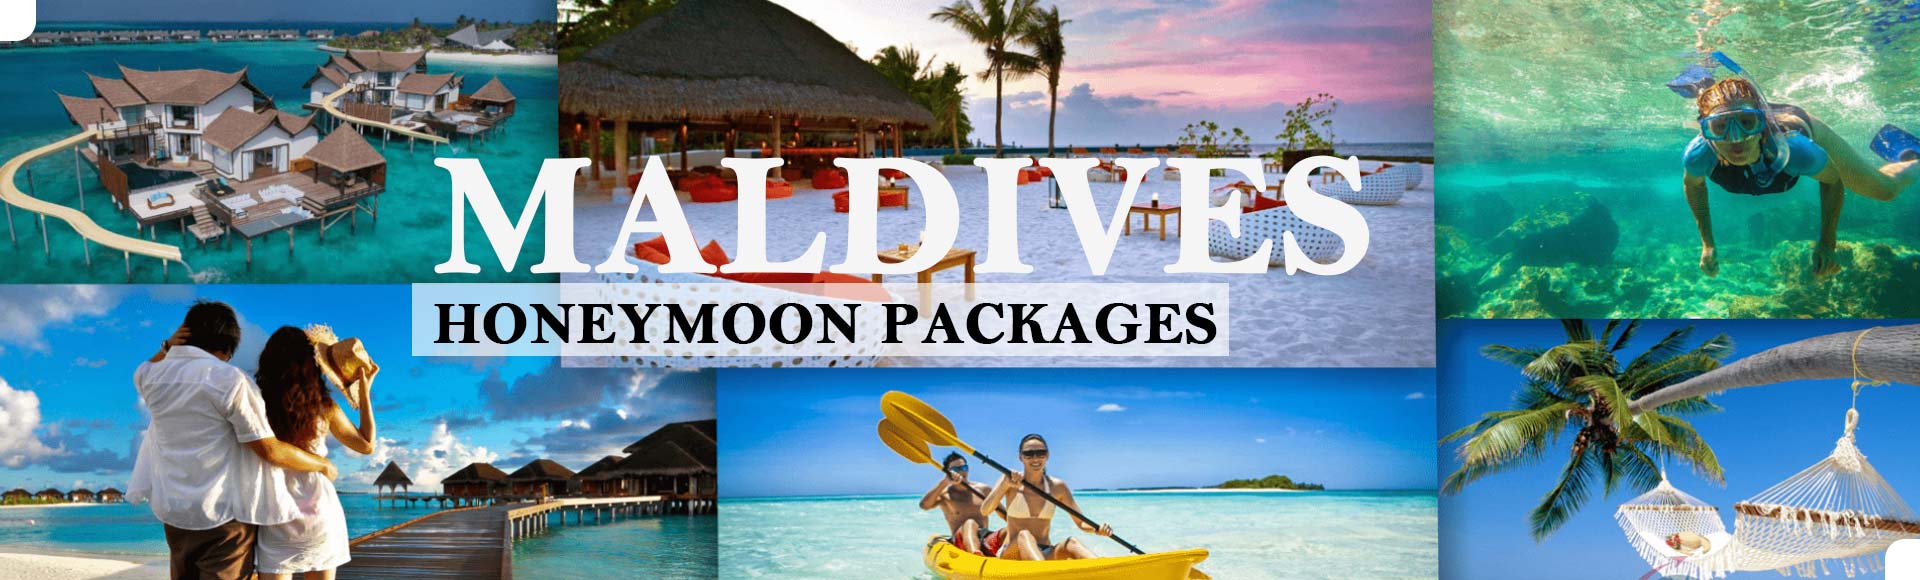 maldives honeymoon packages from india